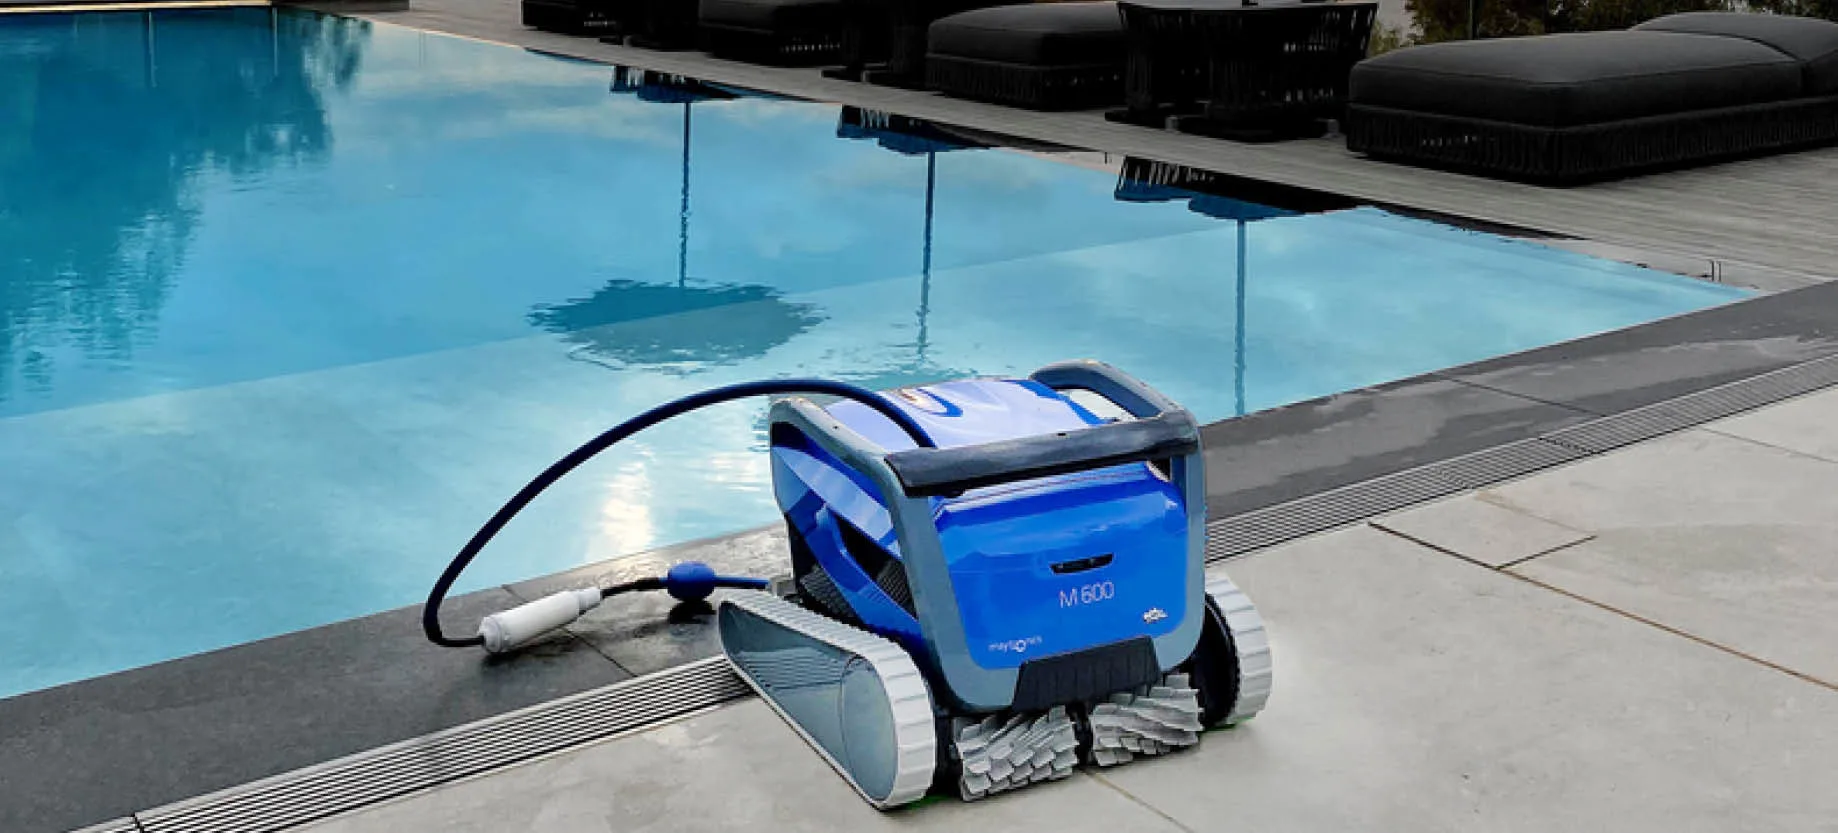 robotic pool cleaners are environmentally friendly